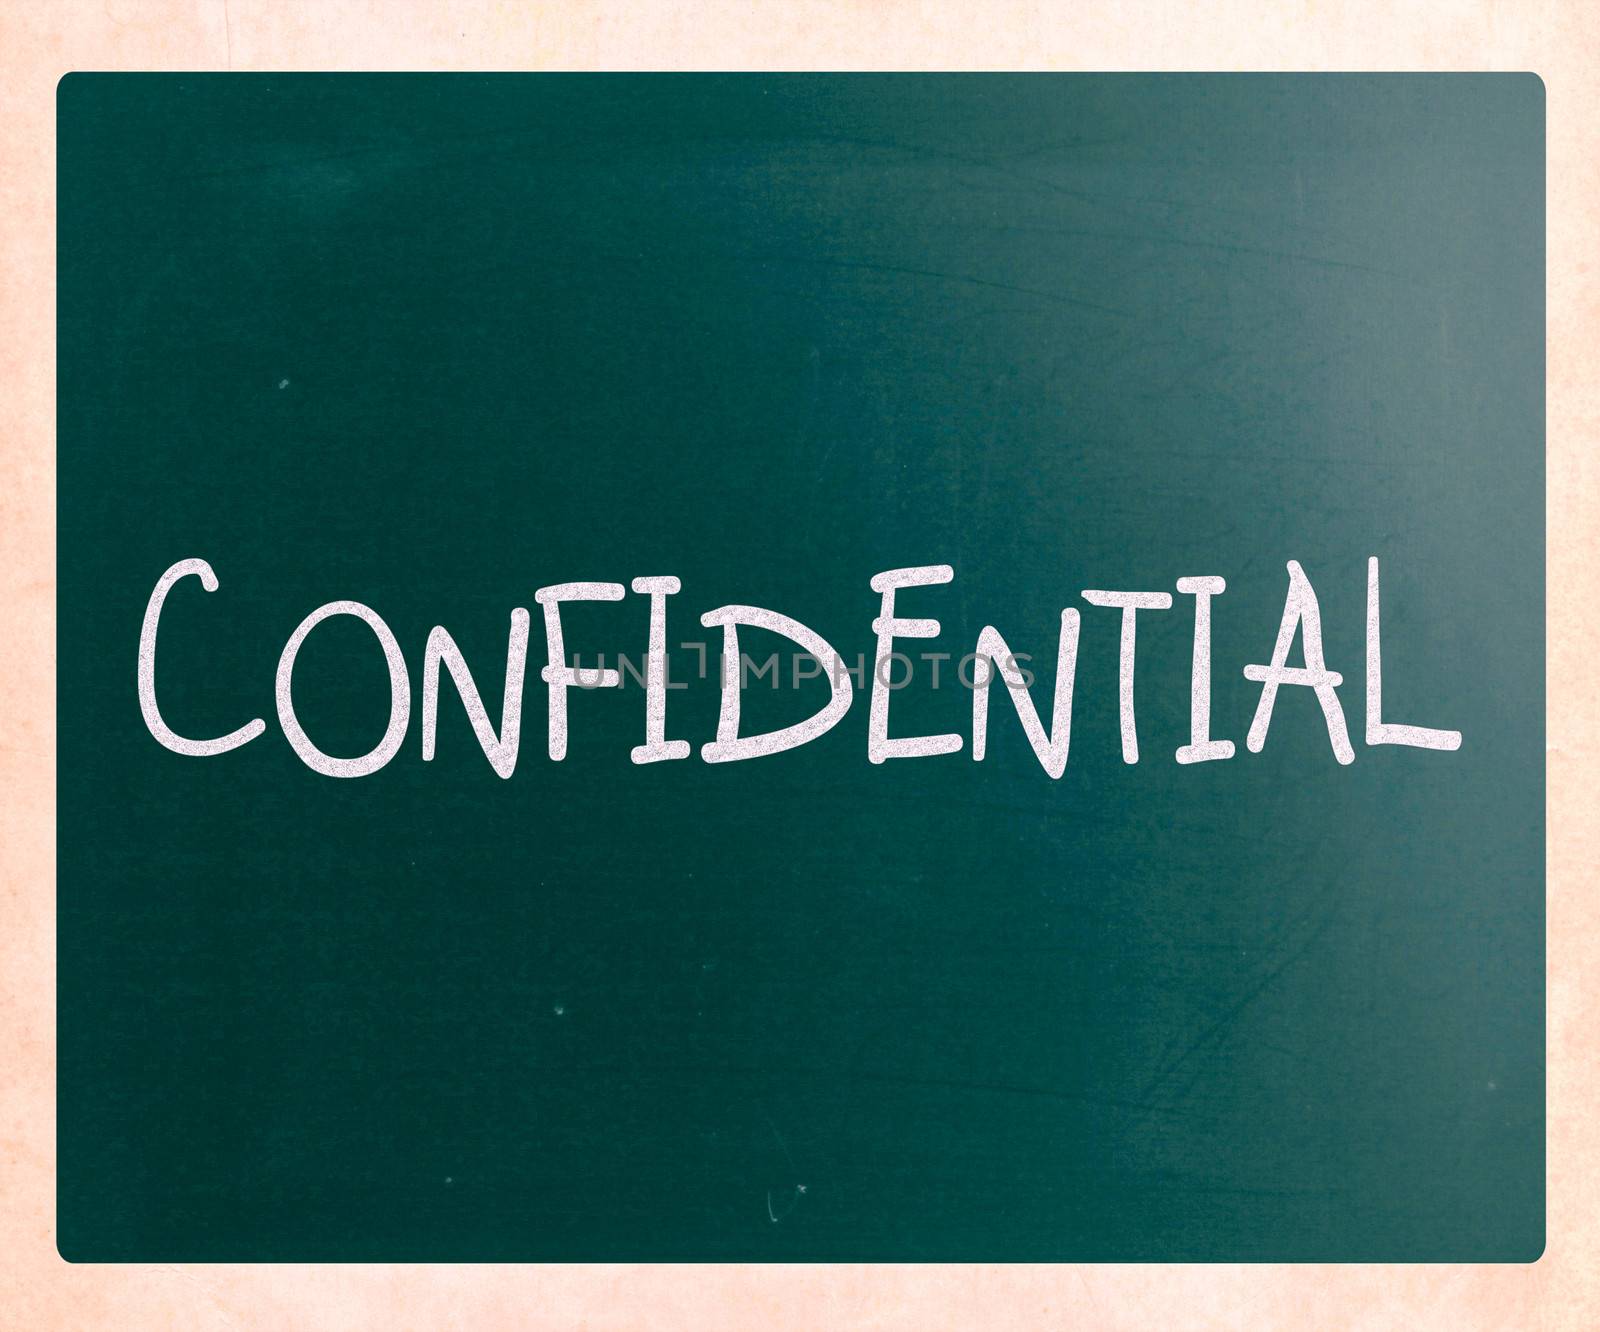 The word "Confidential" handwritten with white chalk on a blackboard